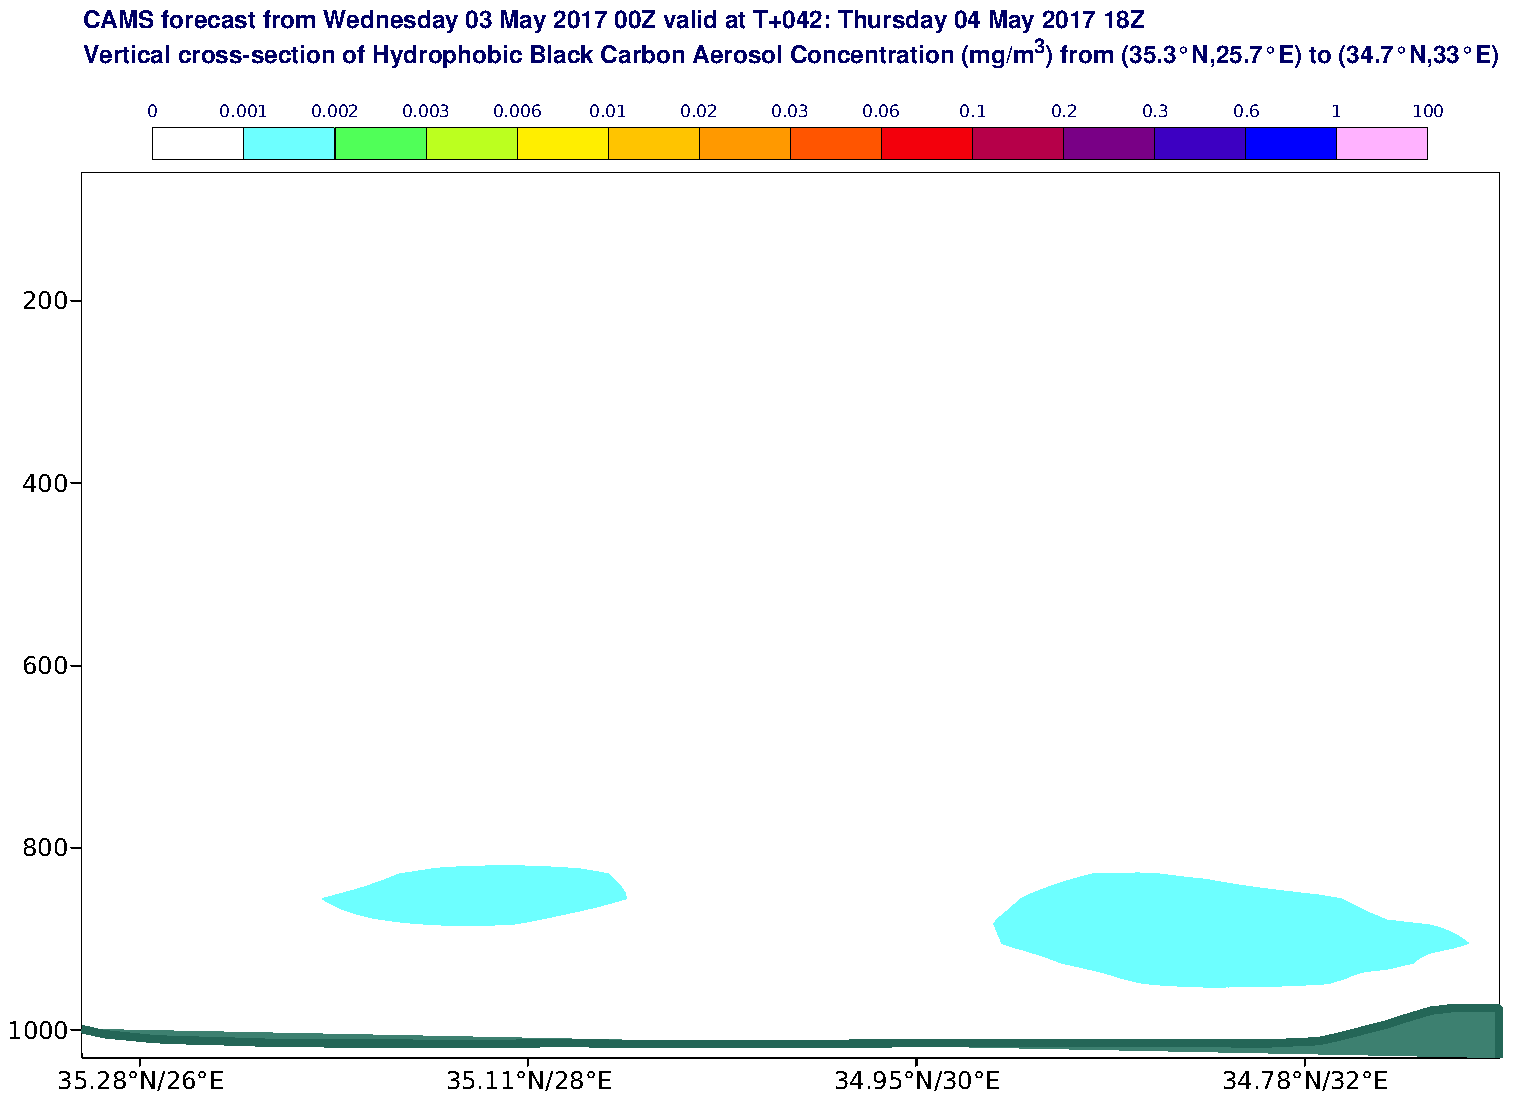 Vertical cross-section of Hydrophobic Black Carbon Aerosol Concentration (mg/m3) valid at T42 - 2017-05-04 18:00